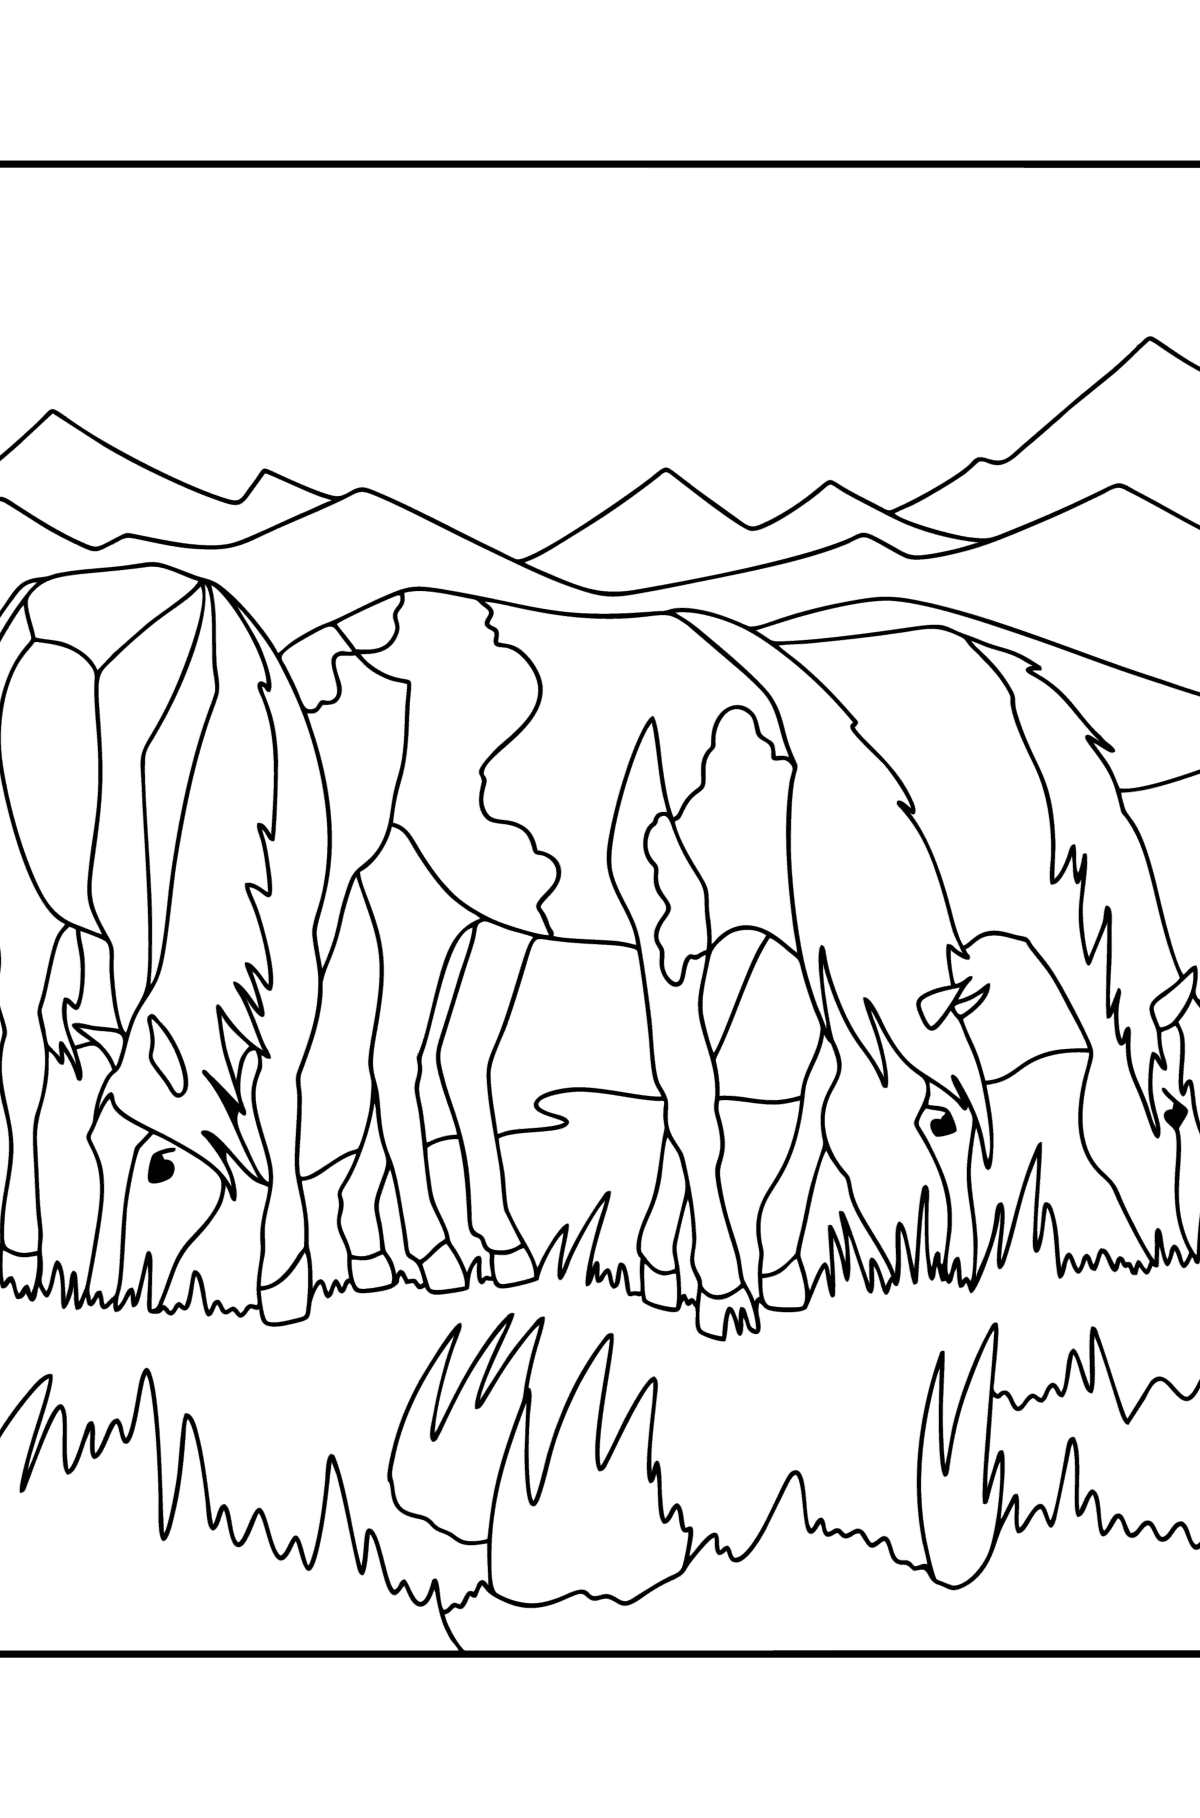 Horses graze сoloring page - Coloring Pages for Kids